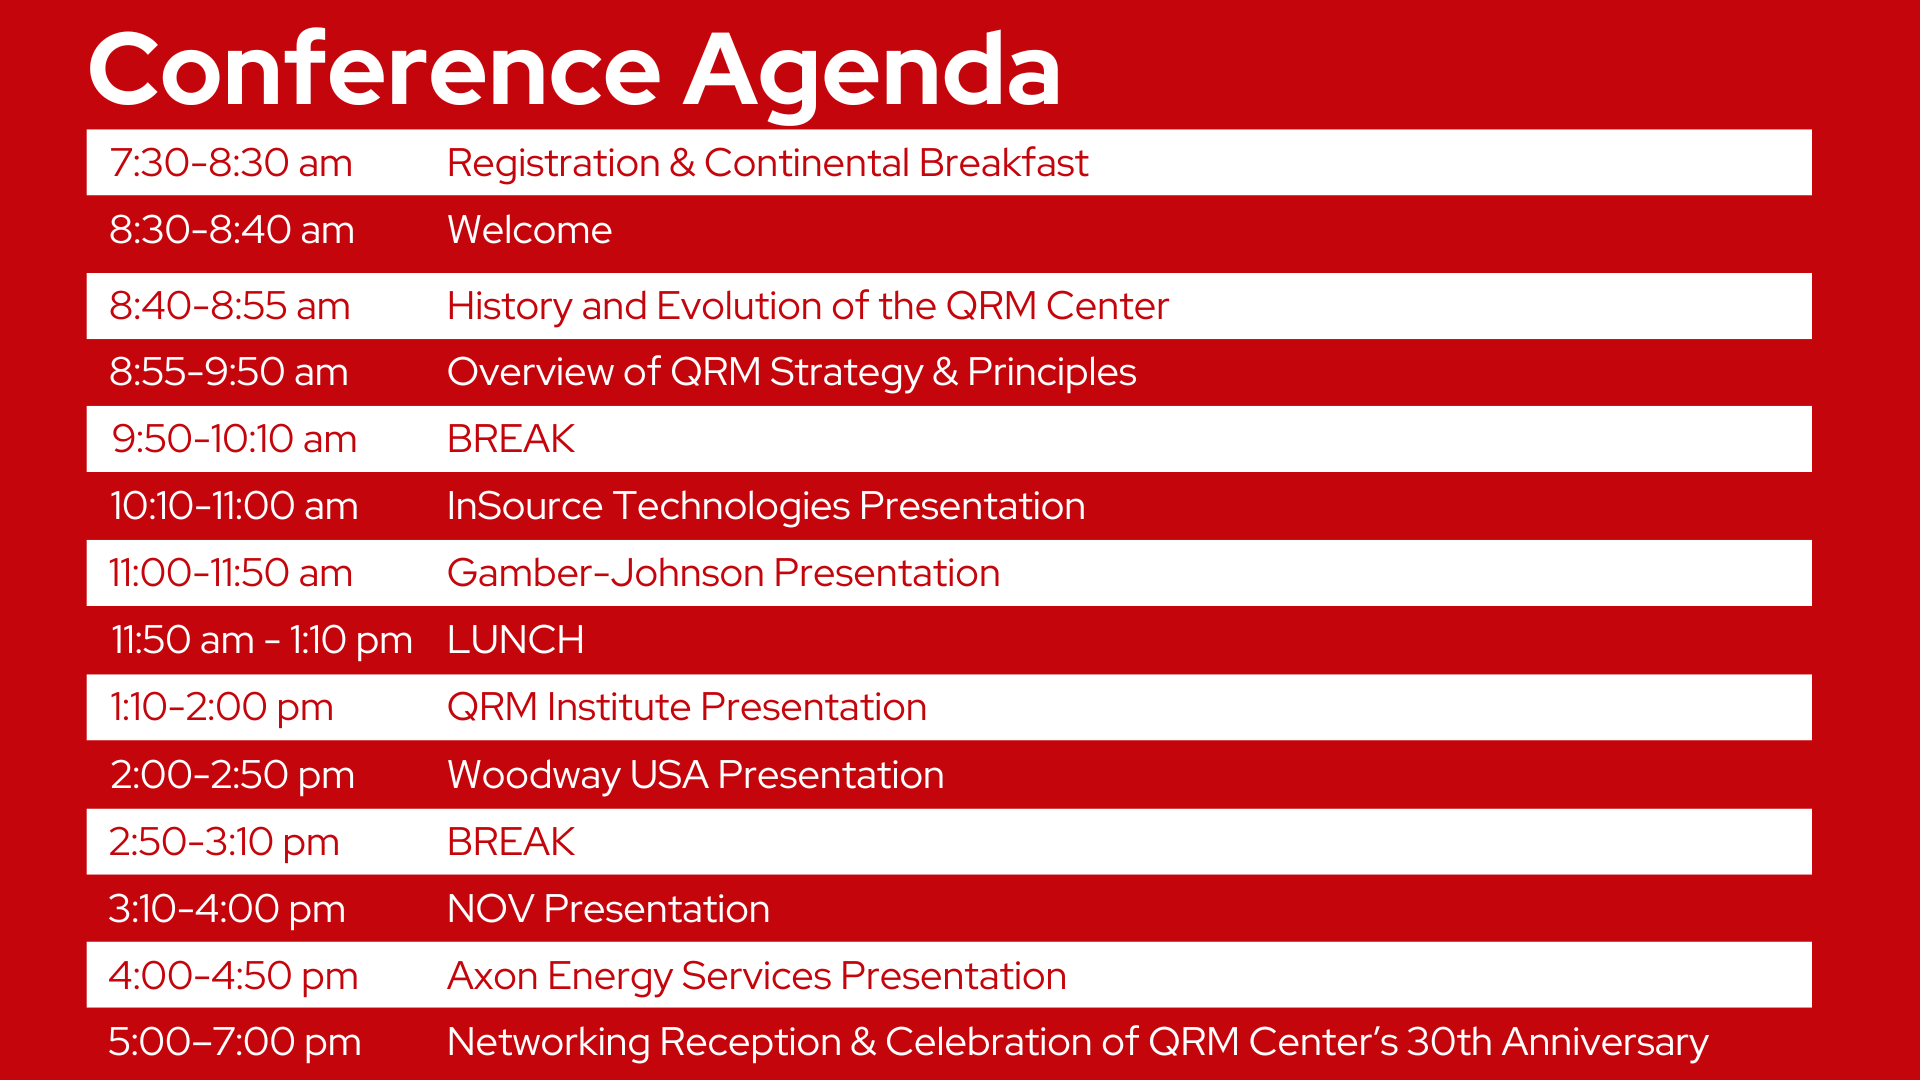 Conference Agenda | 7:30-8:30 am Registration & Continental Breakfast | 8:30-8:40 am Welcome | 8:40-8:55 am History and Evolution of the QRM Center | 8:55-9:50 am Overview of QRM Strategy & Principles| 9:50-10:10 am BREAK | 10:10-11:00 am InSource Technologies Presentation | 11:00-11:50 am InSource Technologies Presentation | 11:50 am - 1:10 pm LUNCH | 1:10-2:00 pm QRM Institute Presentation | 2:00-2:50 pm Woodway USA Presentation | 2:50-3:10 pm BREAK | 3:10-4:00 pm NOV Presentation | 4:00-4:50 pm Axon Energy Services Presentation | 5:00-7:00 pm Networking Reception & Celebration of QRM Center's 30th Anniversary